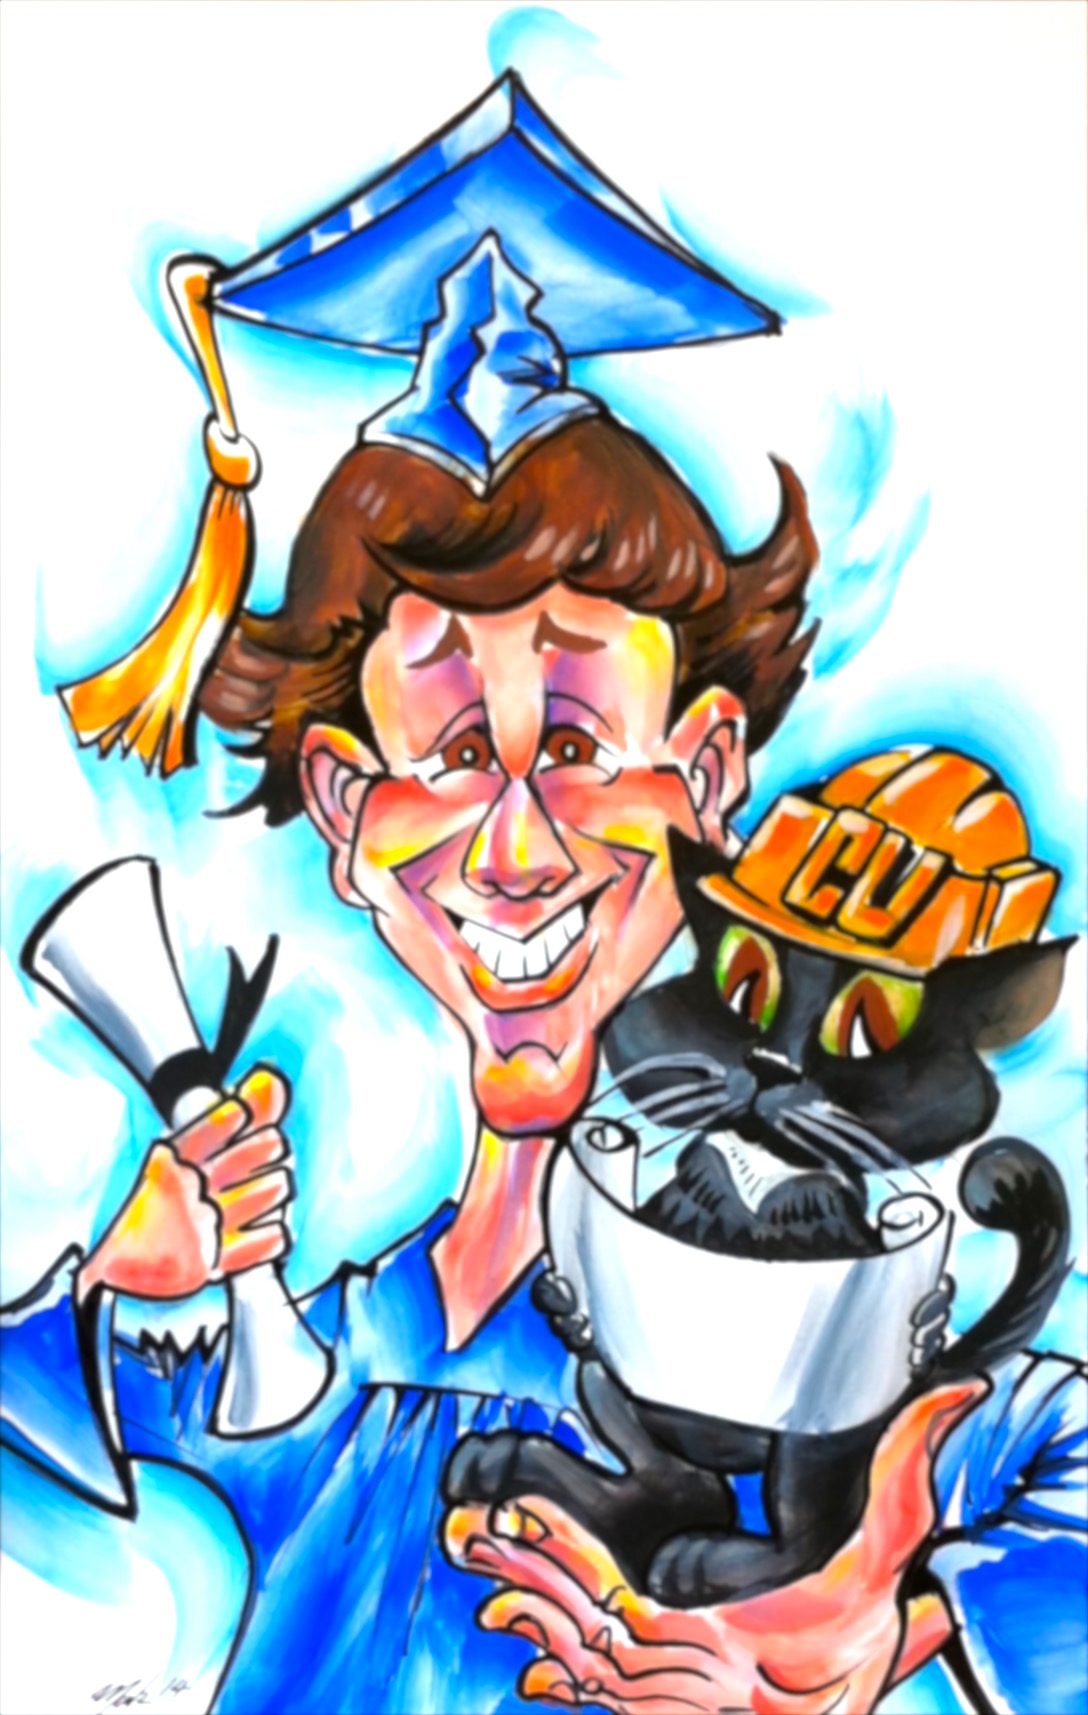 Custom Caricature Drawings For Gift Ideas | Mark Hall Caricature 